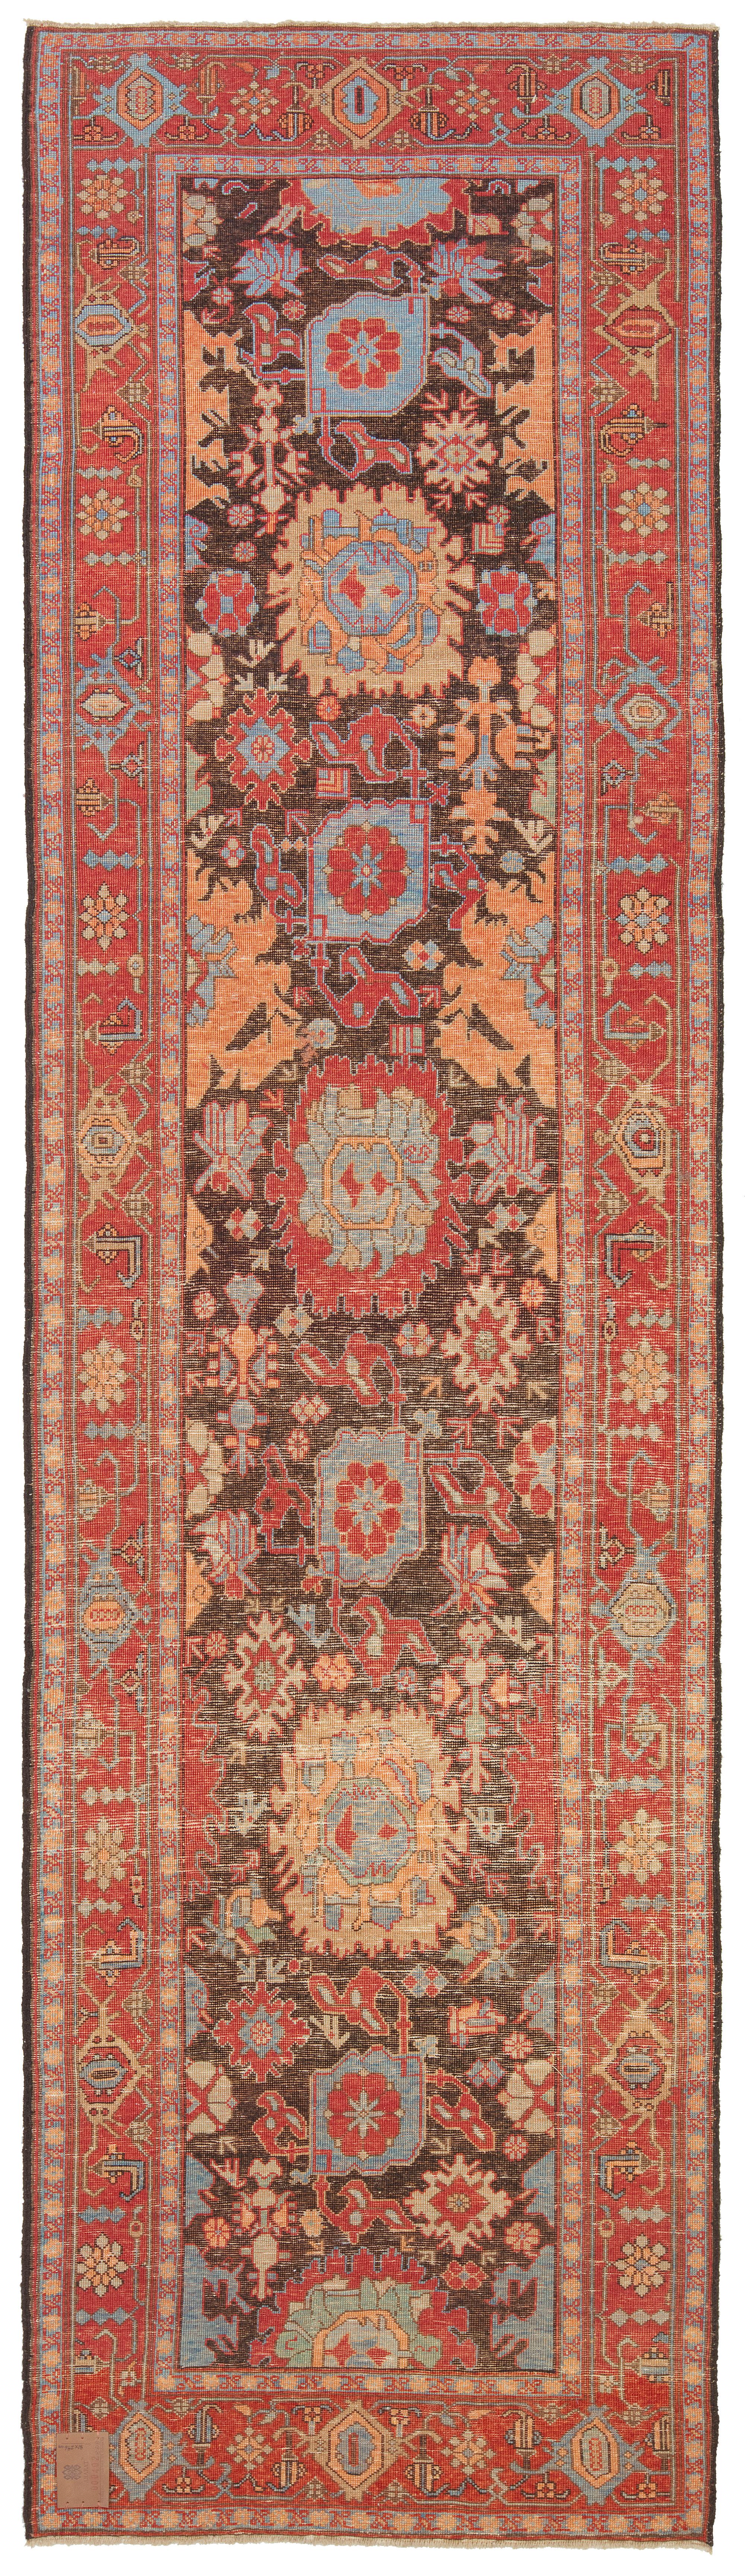 Ararat Rugs Palmettes and Flowers Lattice Rug Revival Carpet, Natural Dyed In New Condition For Sale In Tokyo, JP